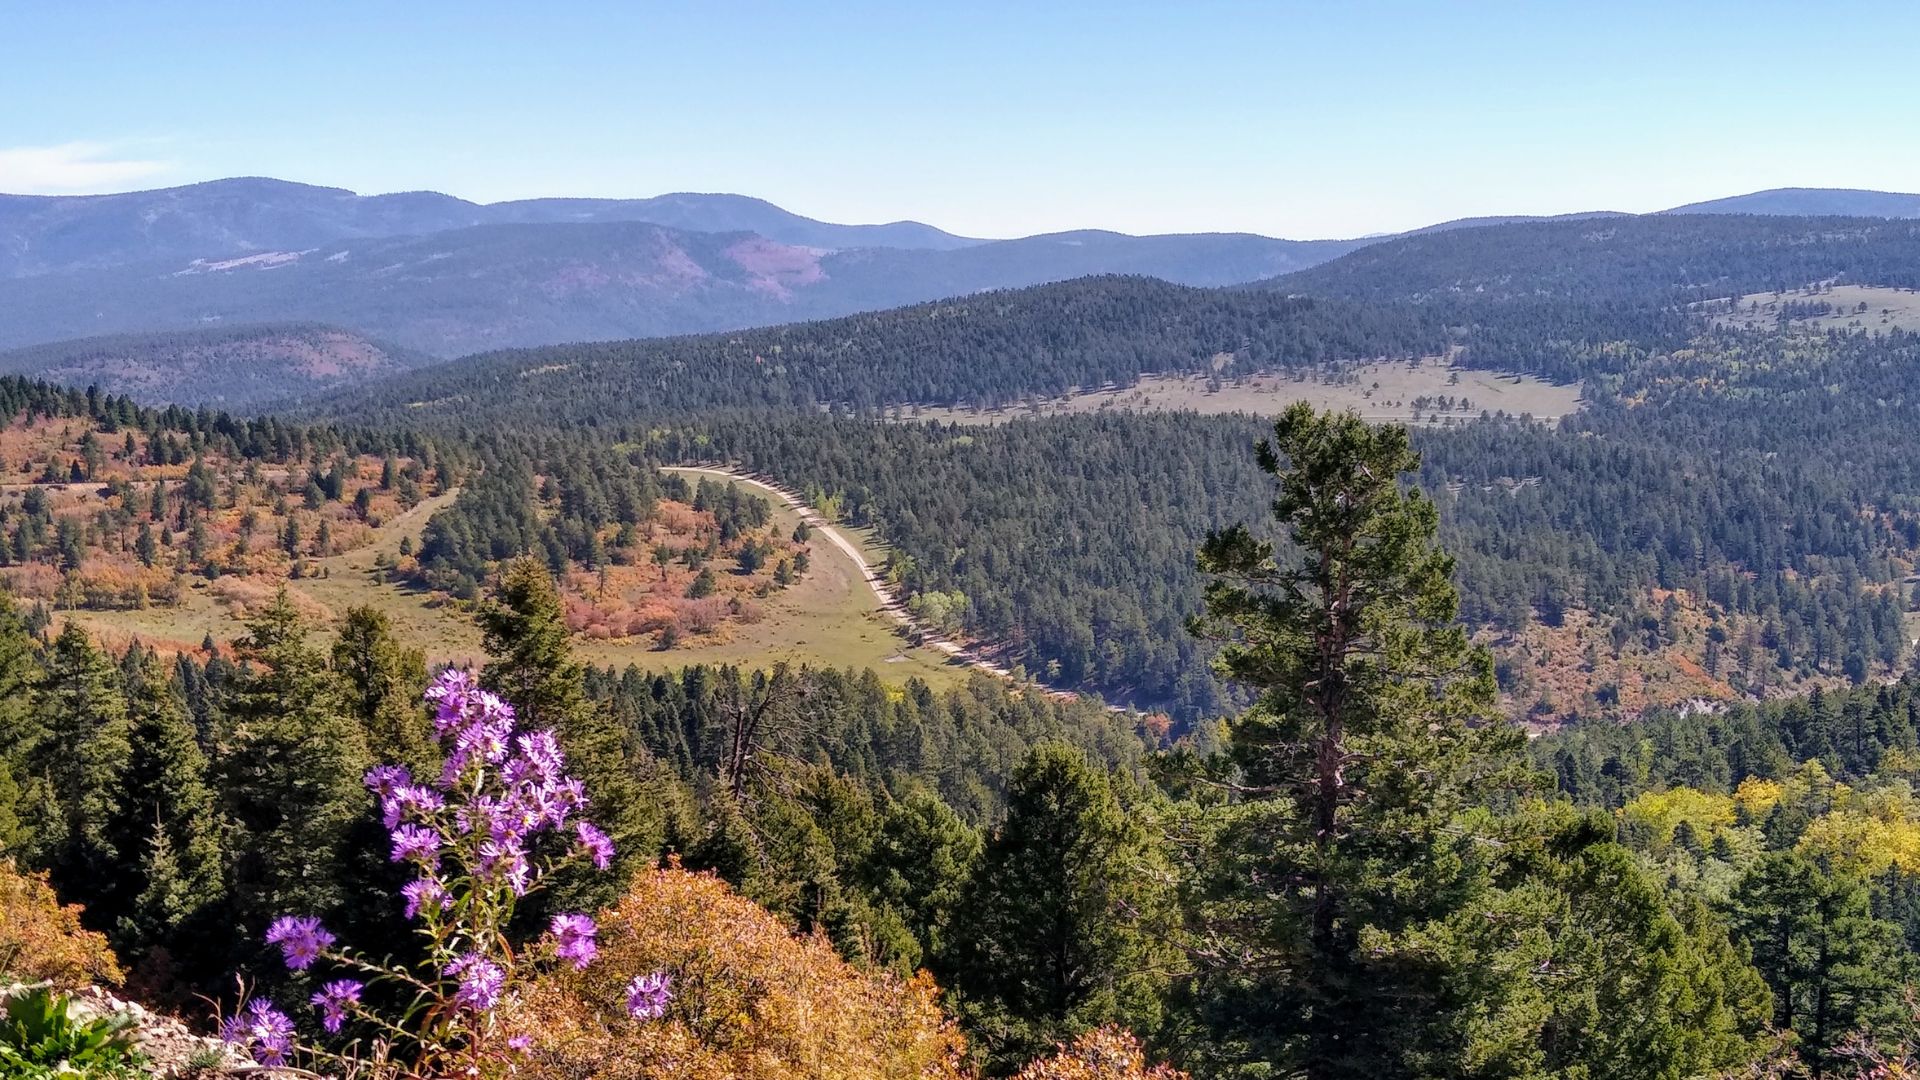 Stunning, mountainous, New Mexico scenery with evergreens and a purple flowering tree.